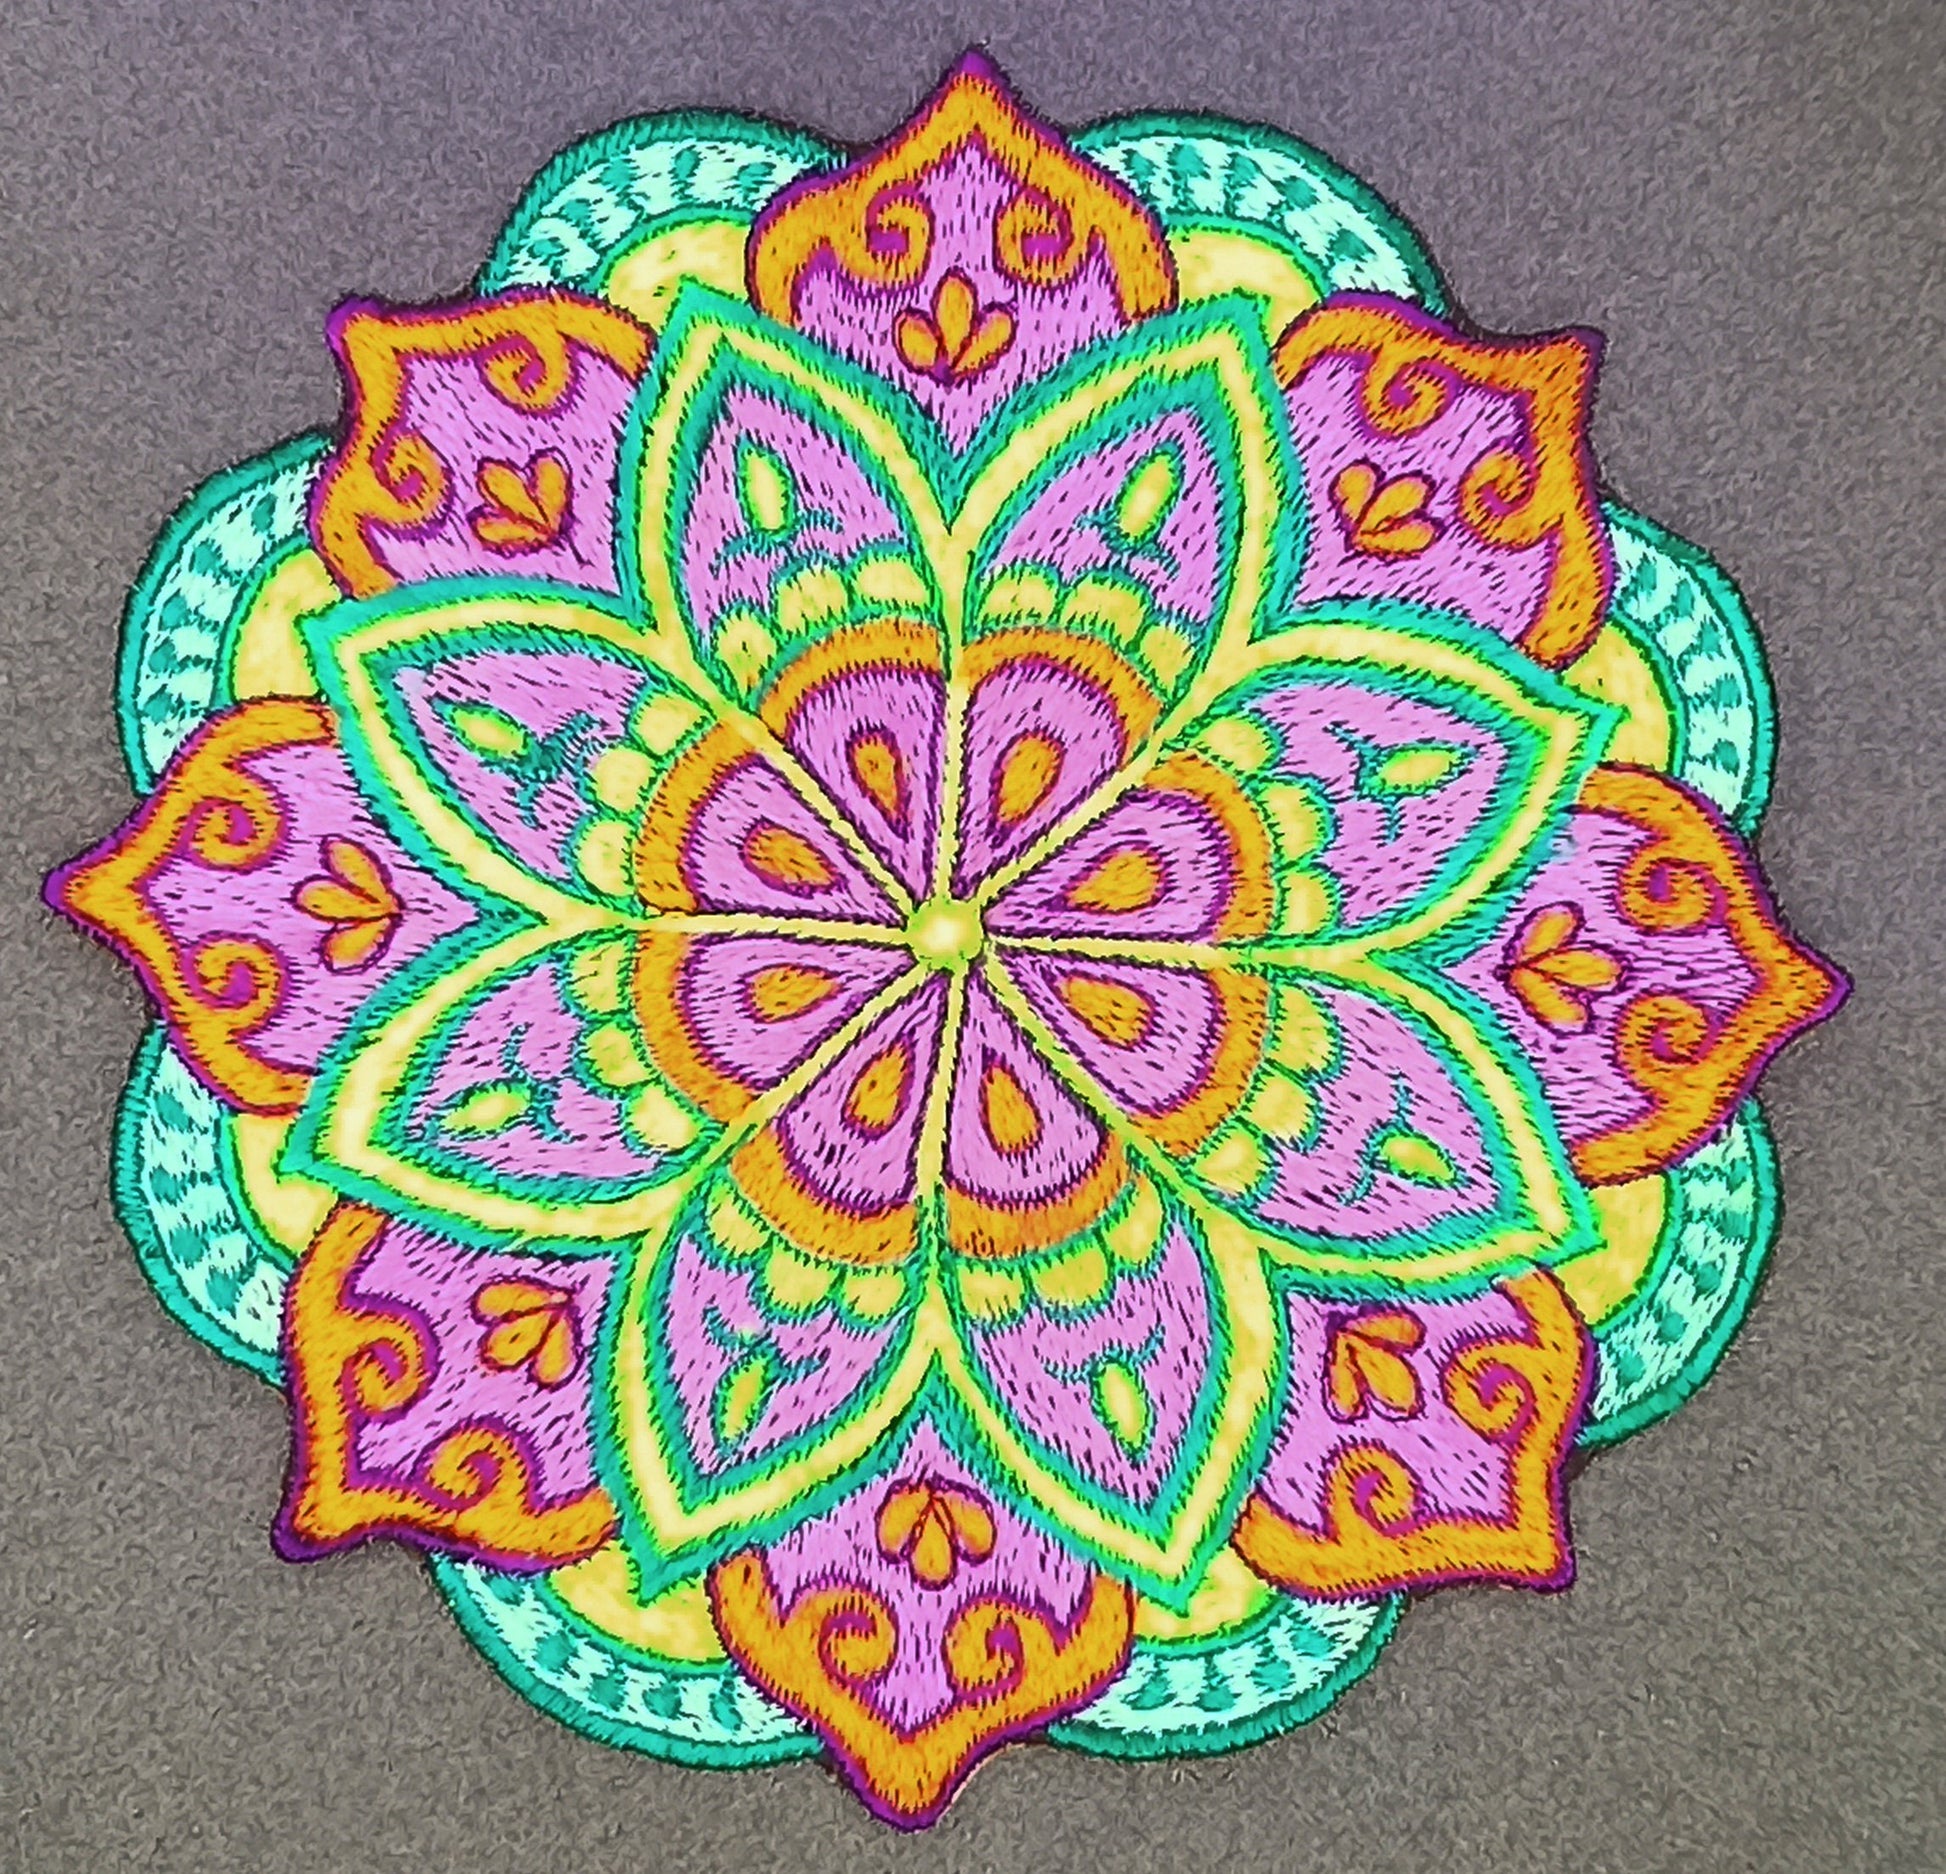 Peyote Mandala Medium Patch embroidery art with blacklight colors sacred cactus mescaline mandala higher psychedelic connection to life